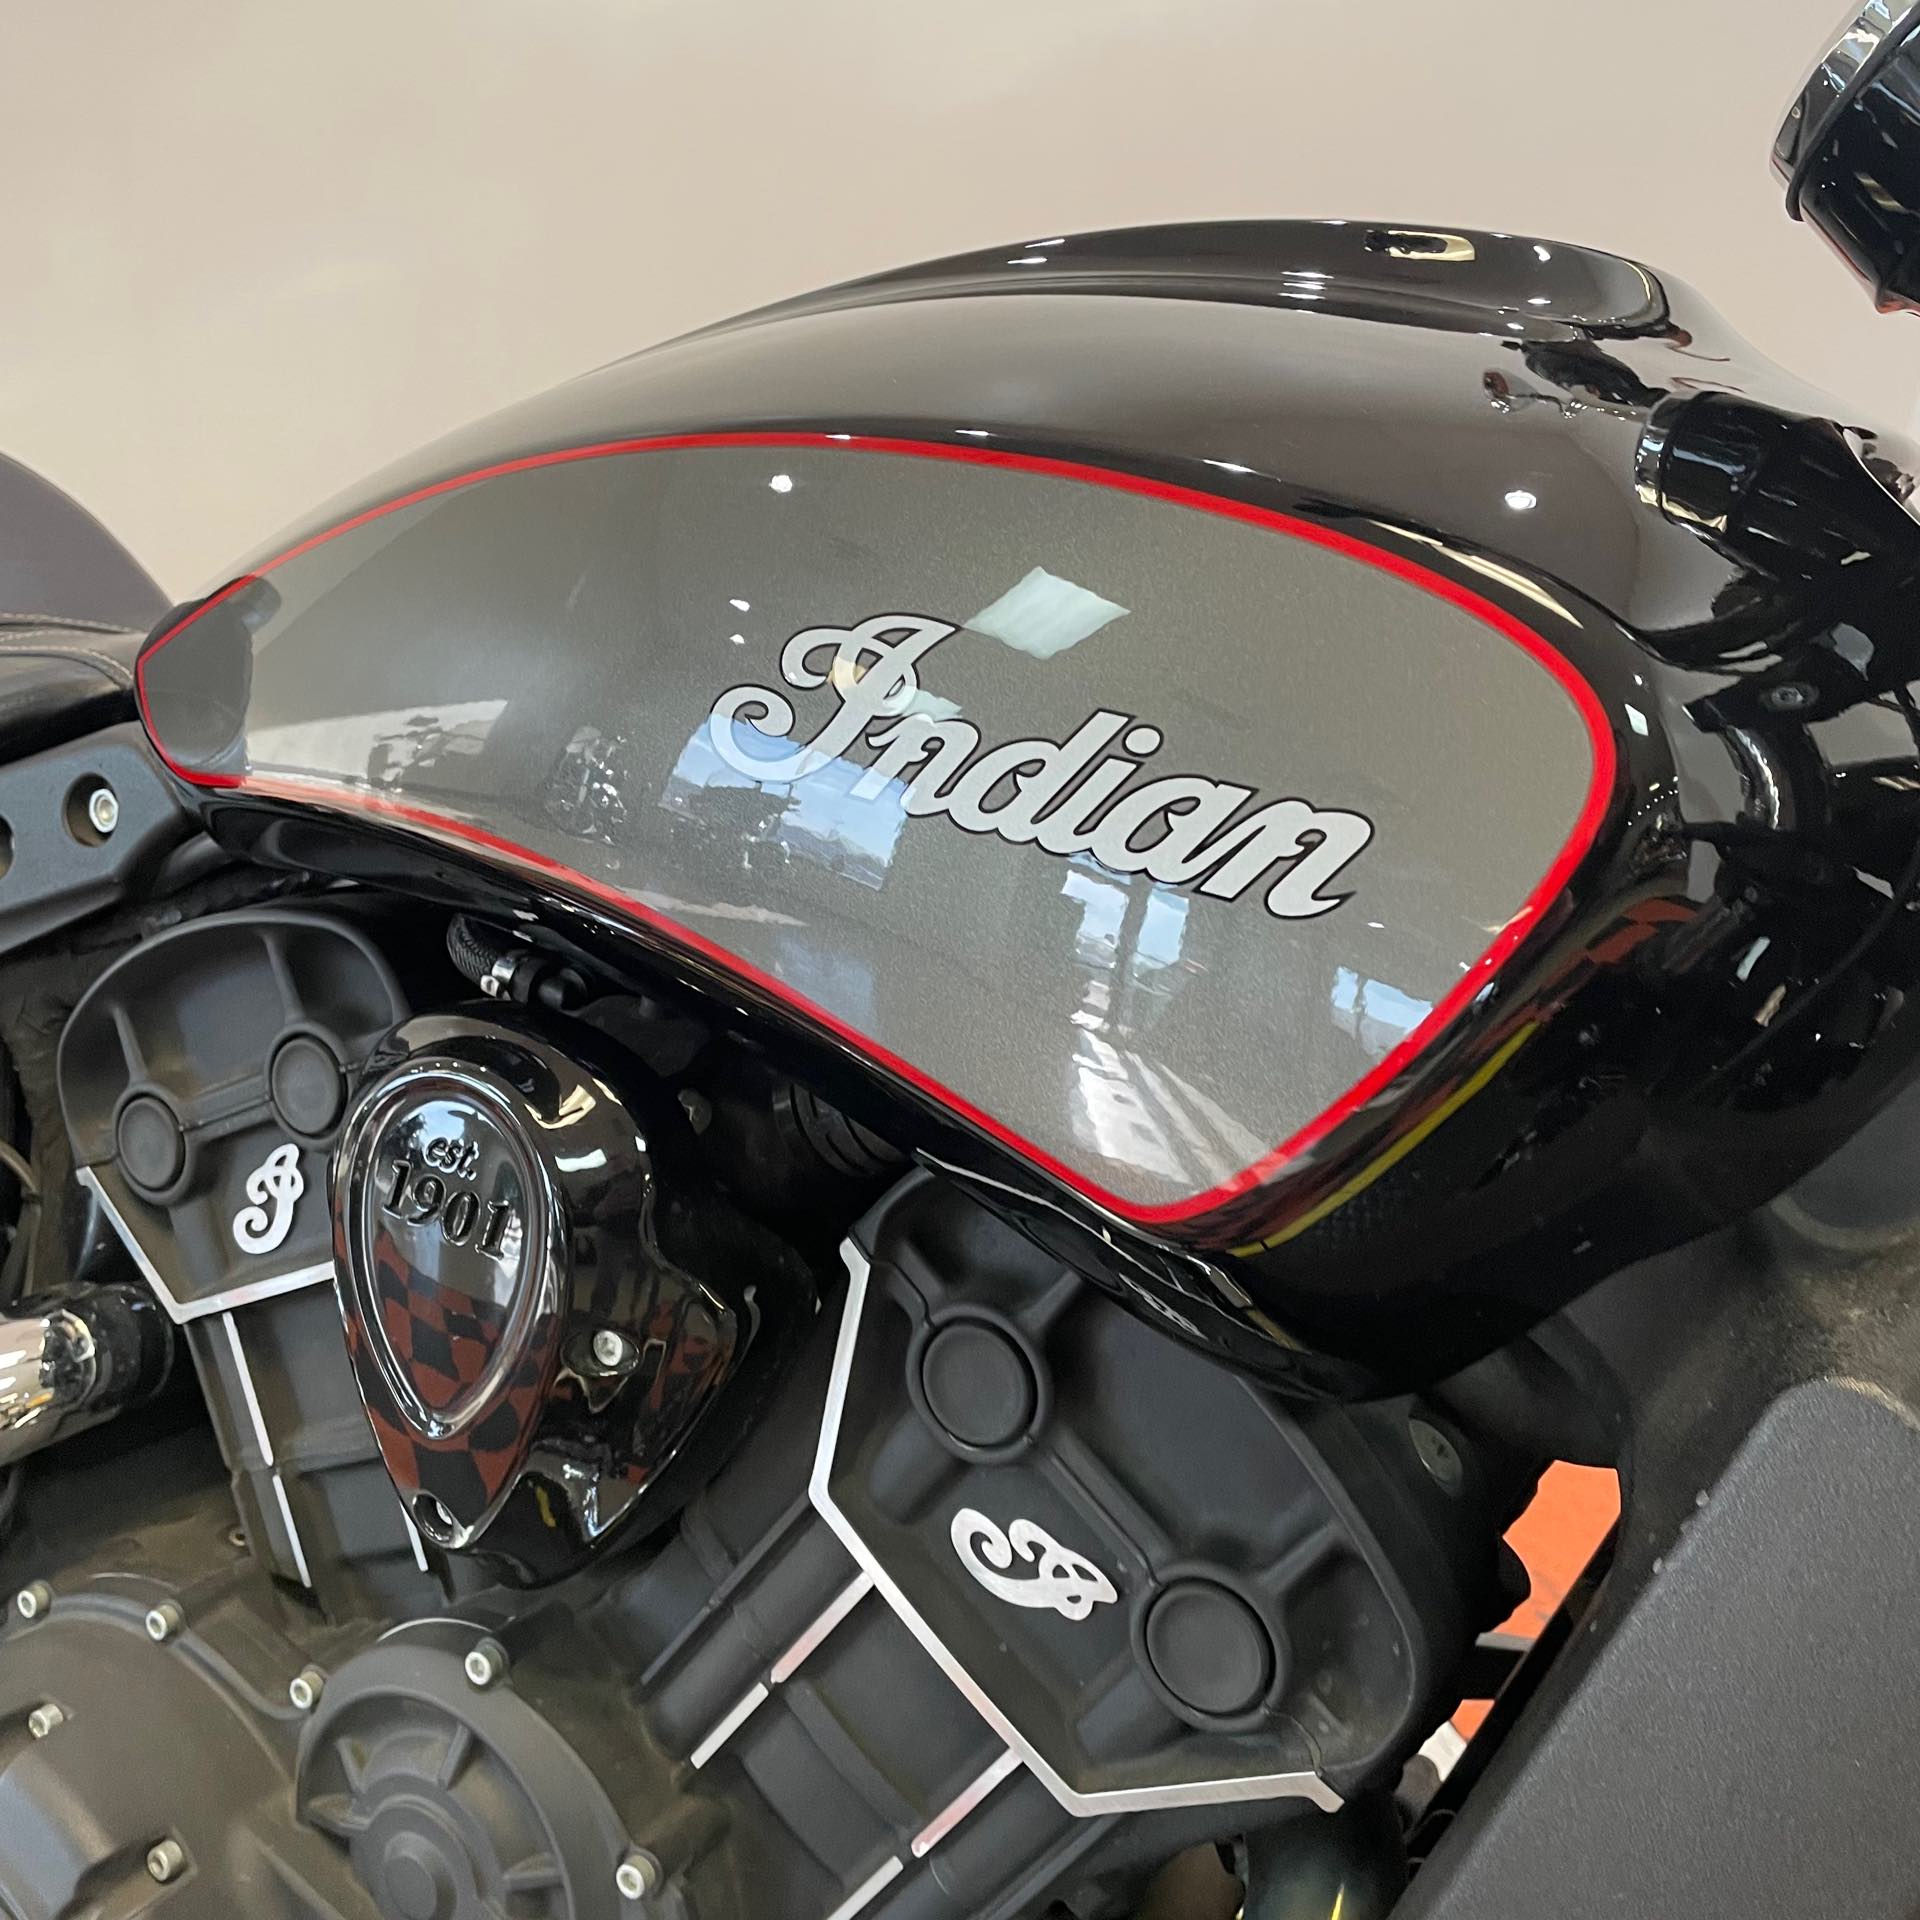 2018 Indian Motorcycle Scout Sixty at Harley-Davidson of Indianapolis